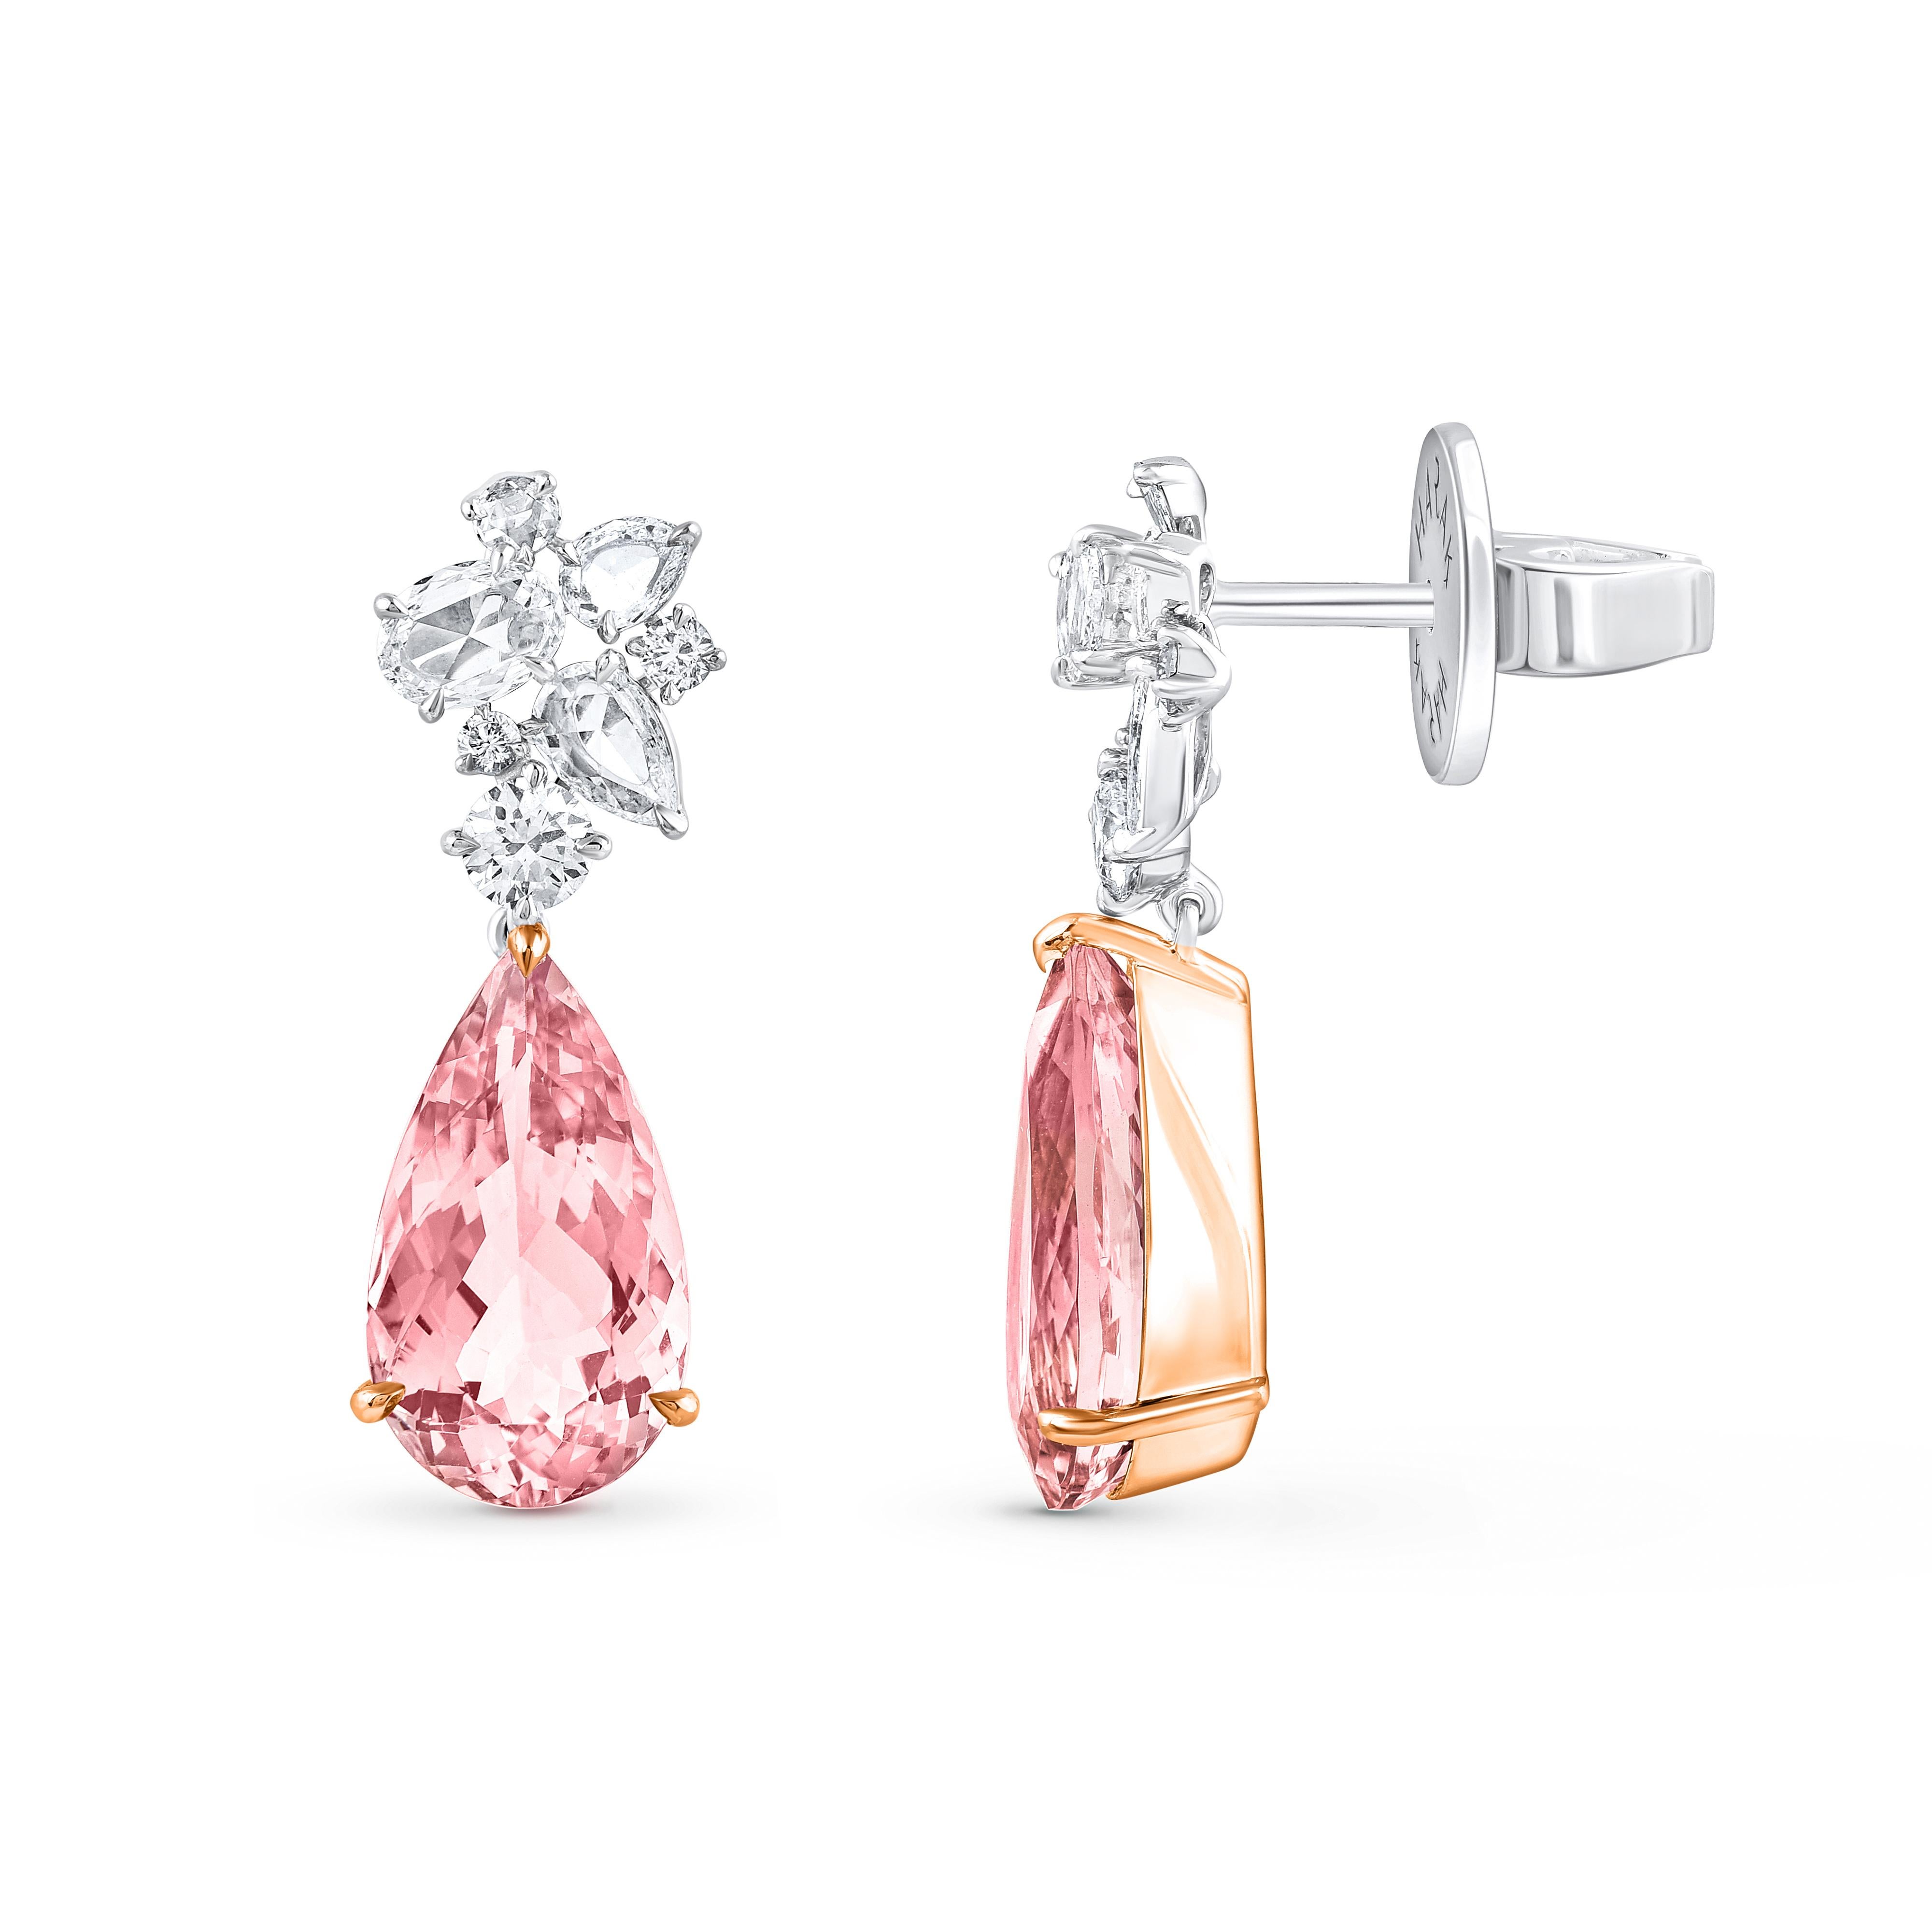 Contemporary HARAKH 1 1/3 Carat Brilliant Cut Colorless Diamond and Morganite Earrings For Sale